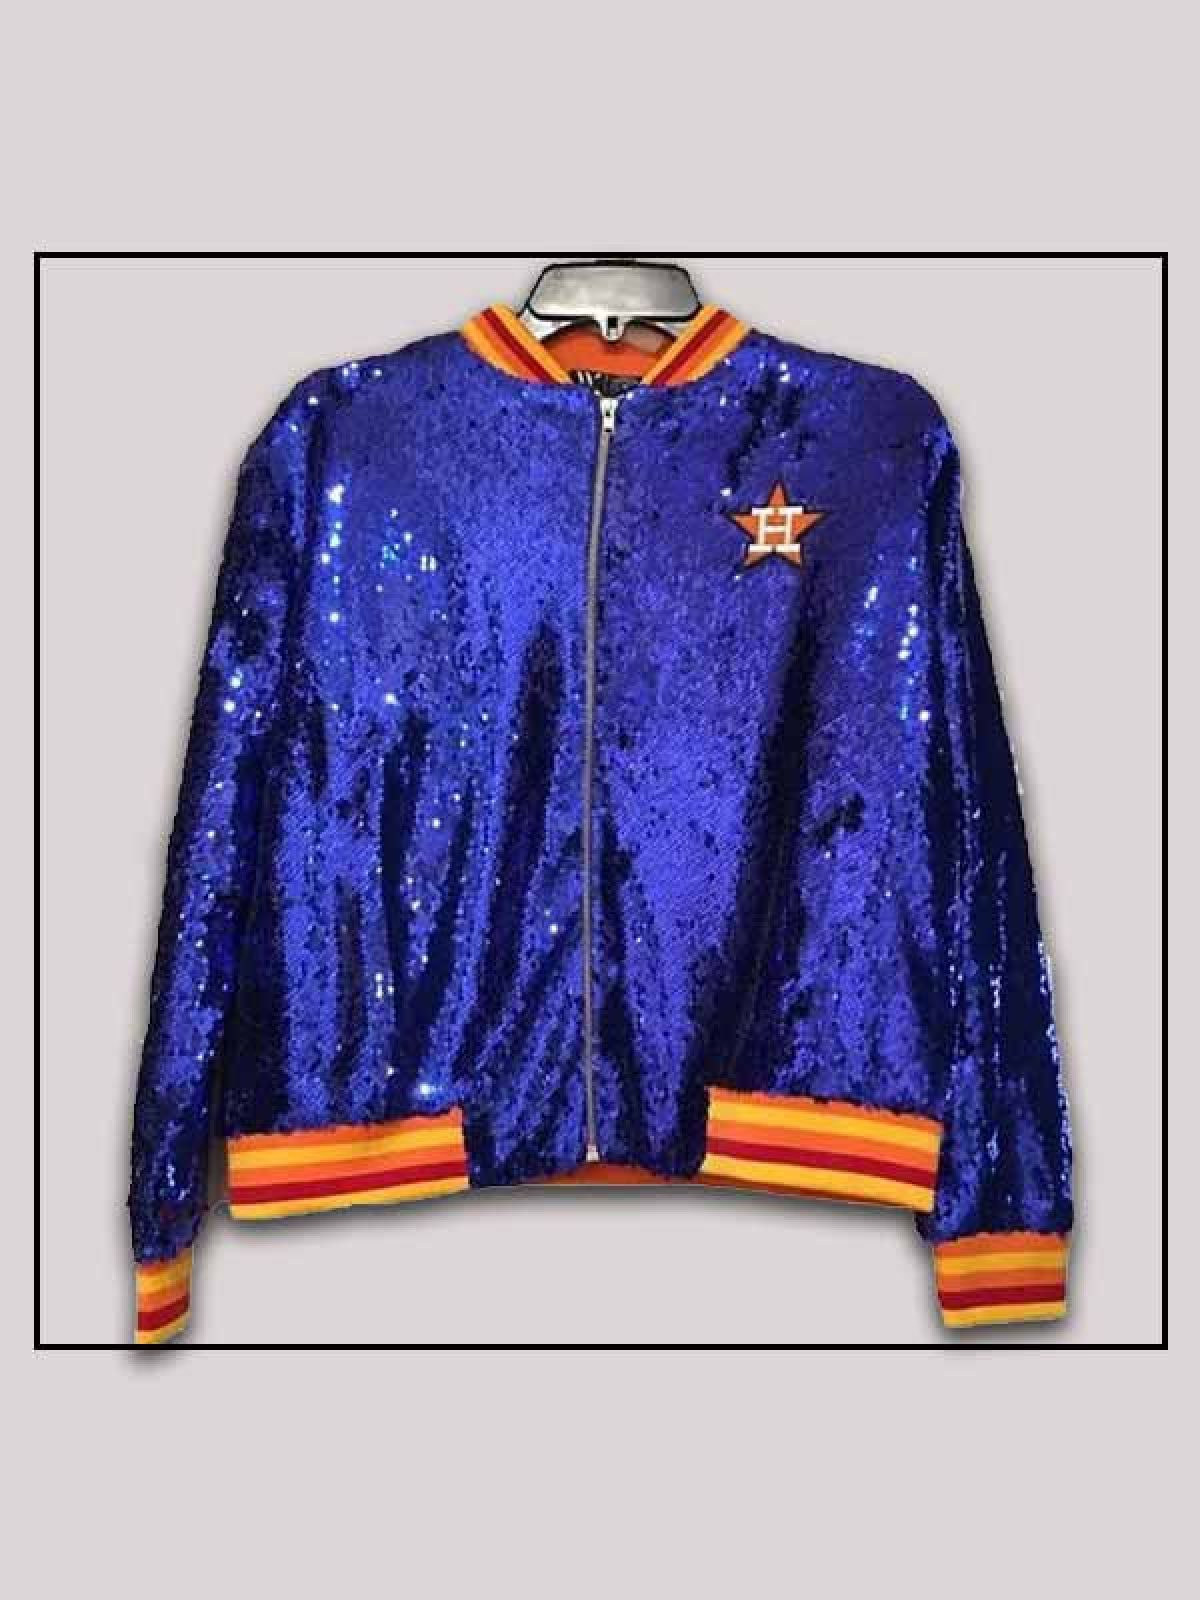 Best Starter Throwback Astros Warmup Jacket for sale in Brazoria County,  Texas for 2023